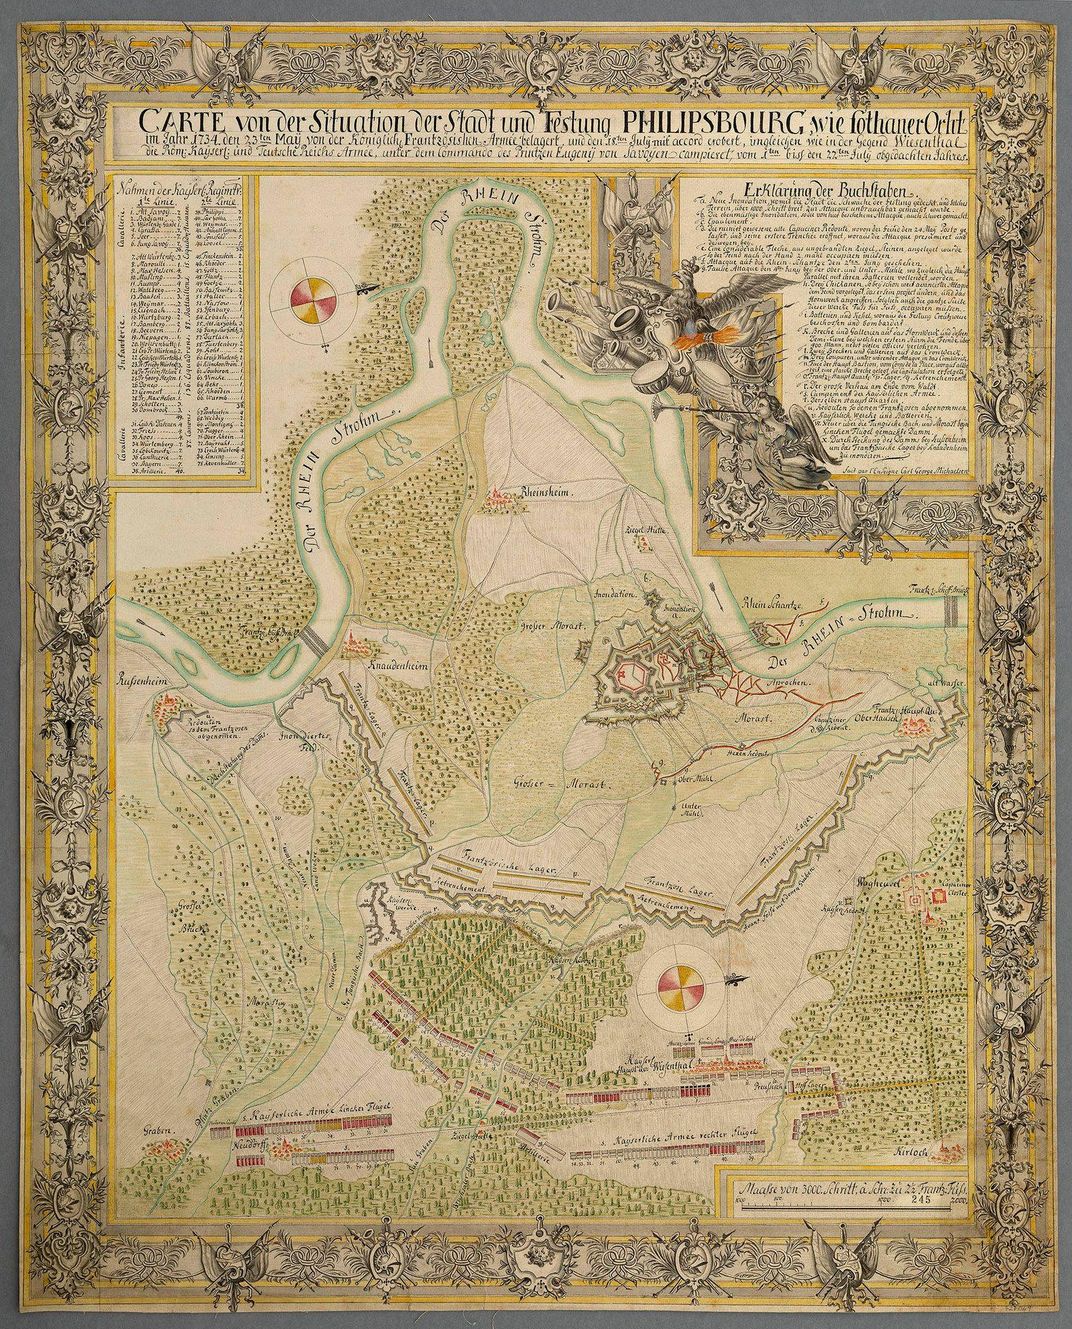 A colorful map of Philippsburg